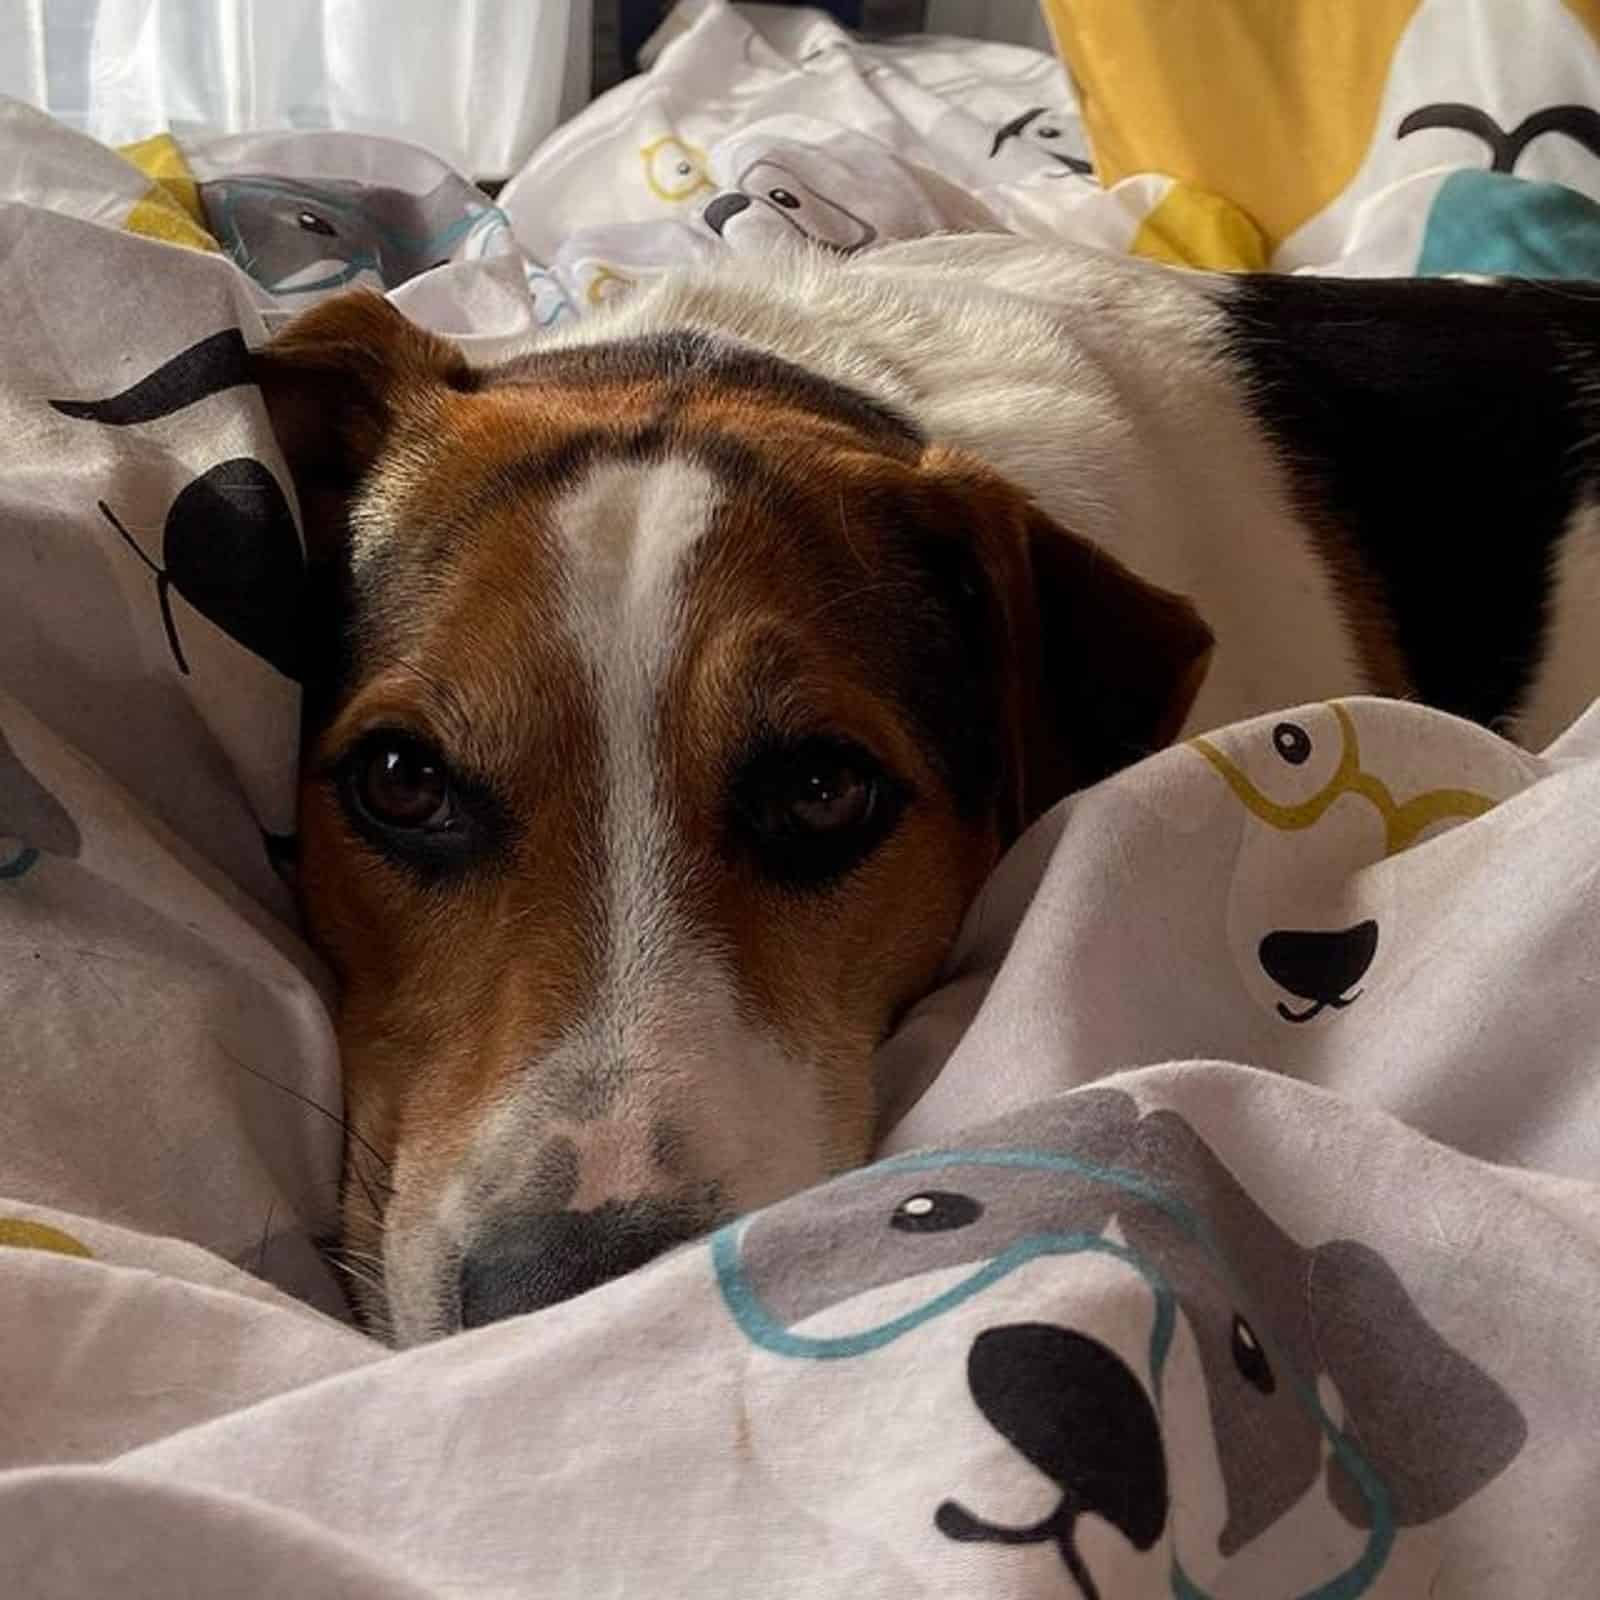 jack russell beagle mix lying on a bed